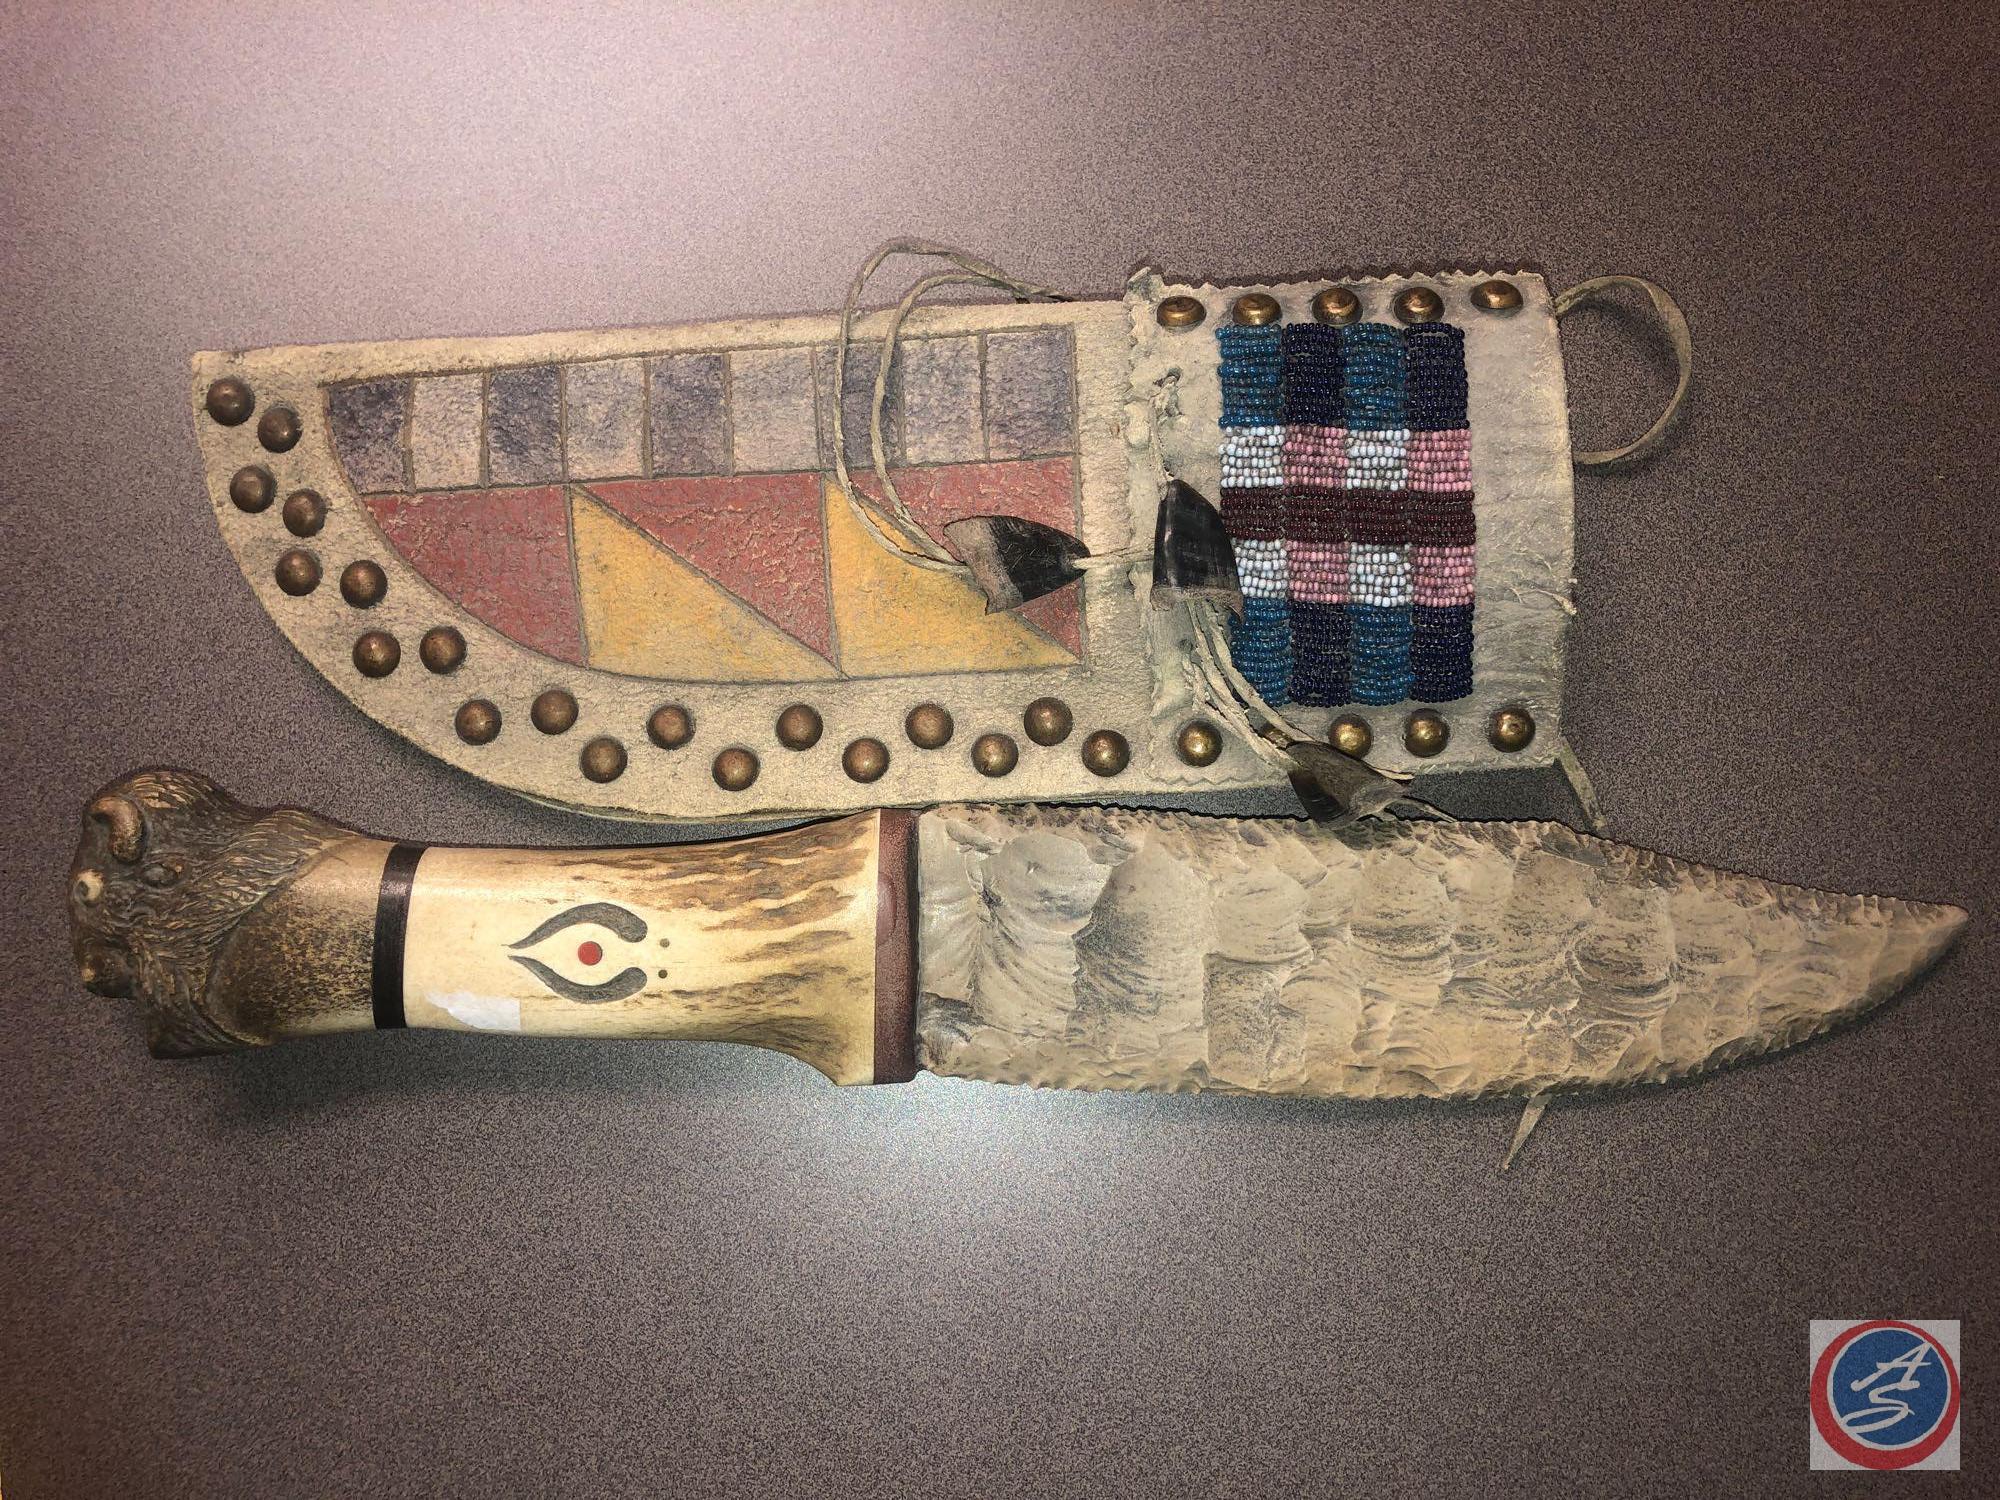 Antique Antler Carved Knife with Leather Case Containing Nail Head Accents and Claws